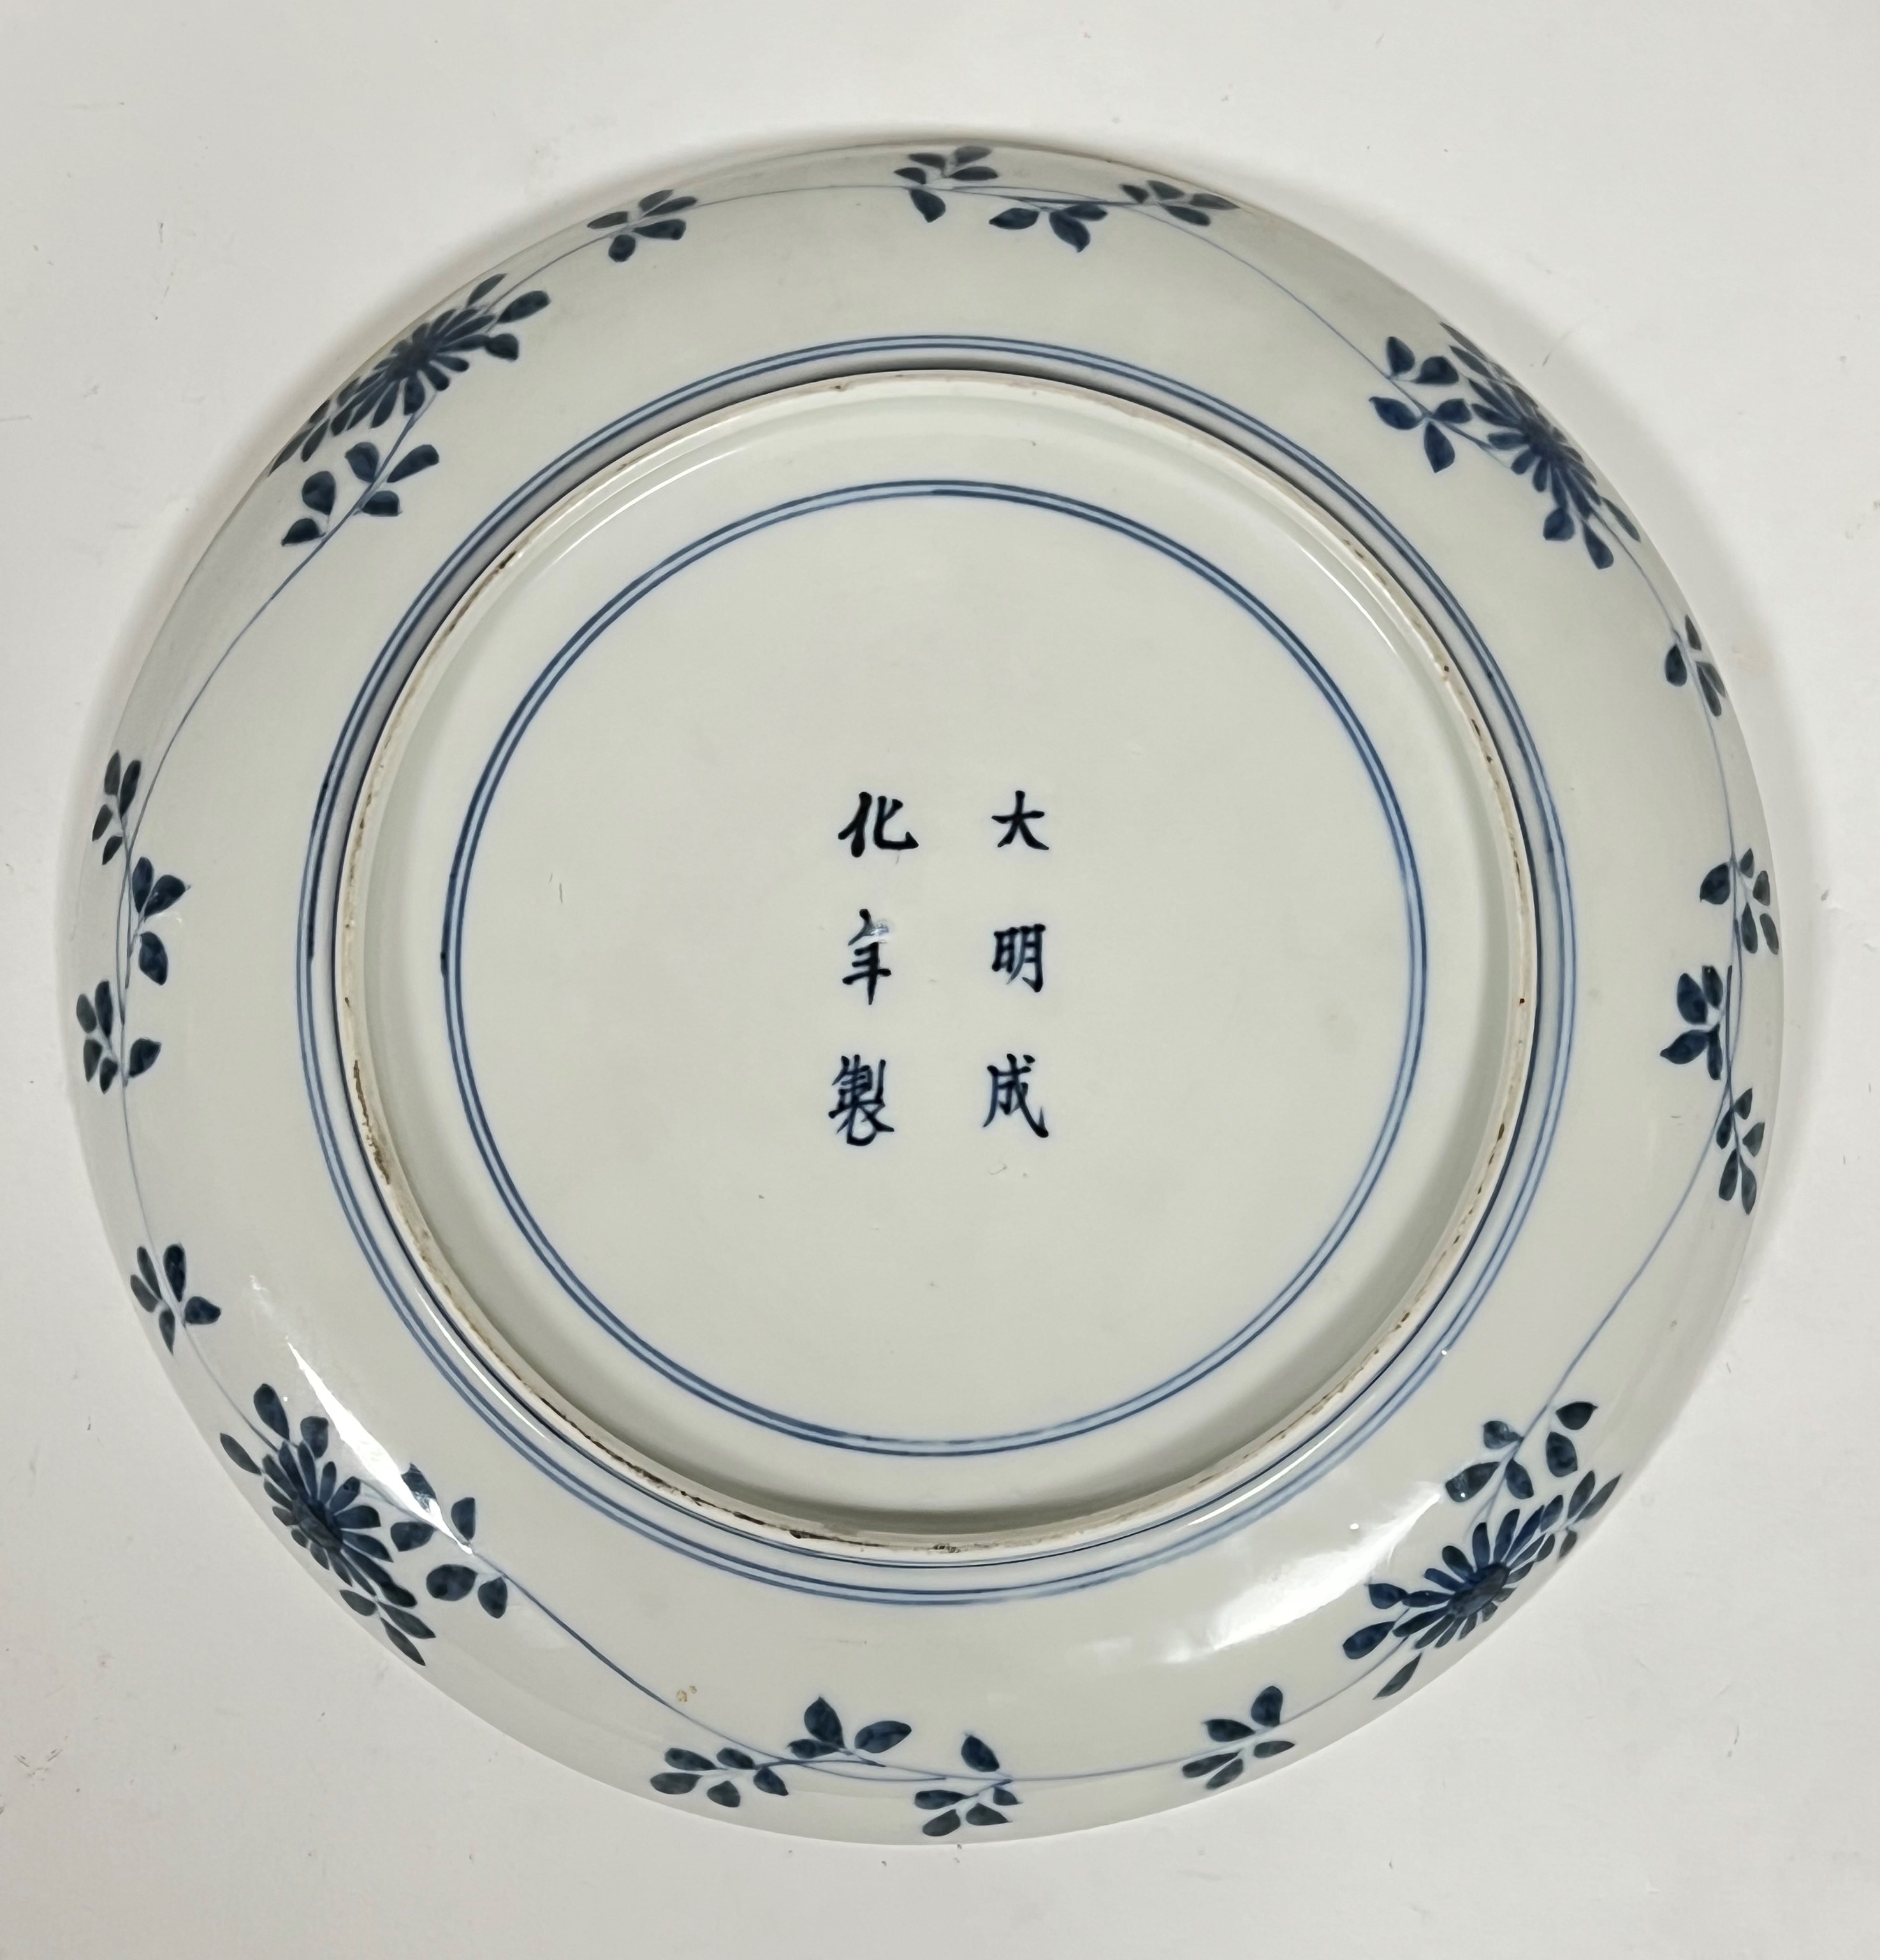 A 19th century Japanese blue and white plate decorated with scene of cranes and mountains, with - Image 2 of 2